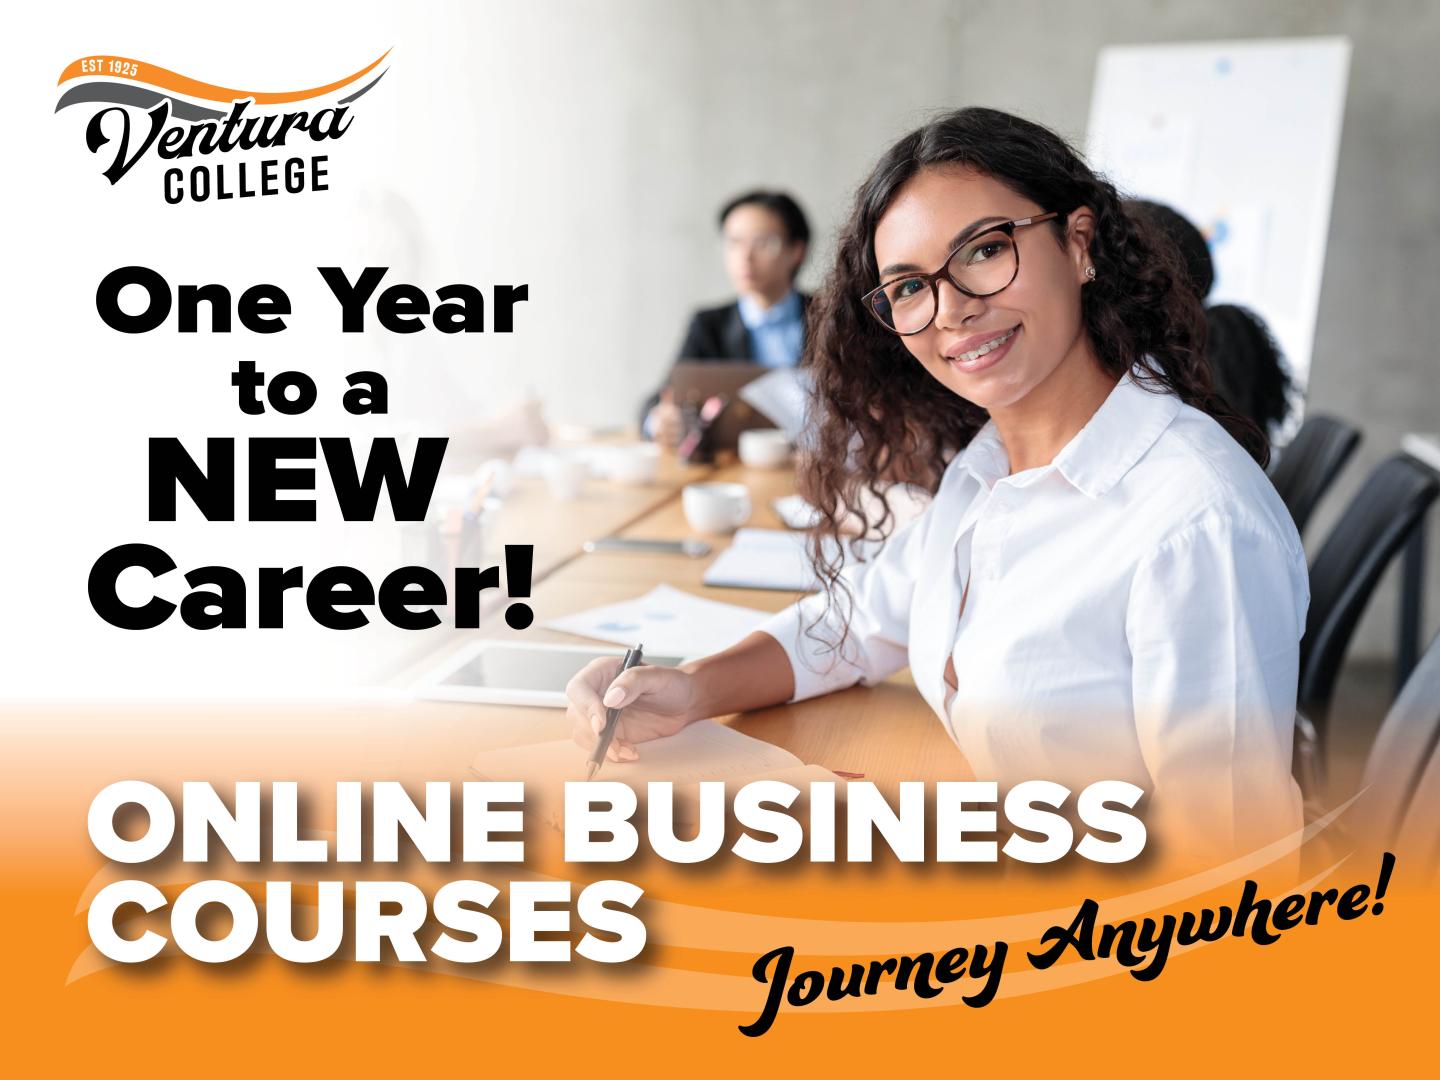 Online Business Courses Ad - Features Female taking notes